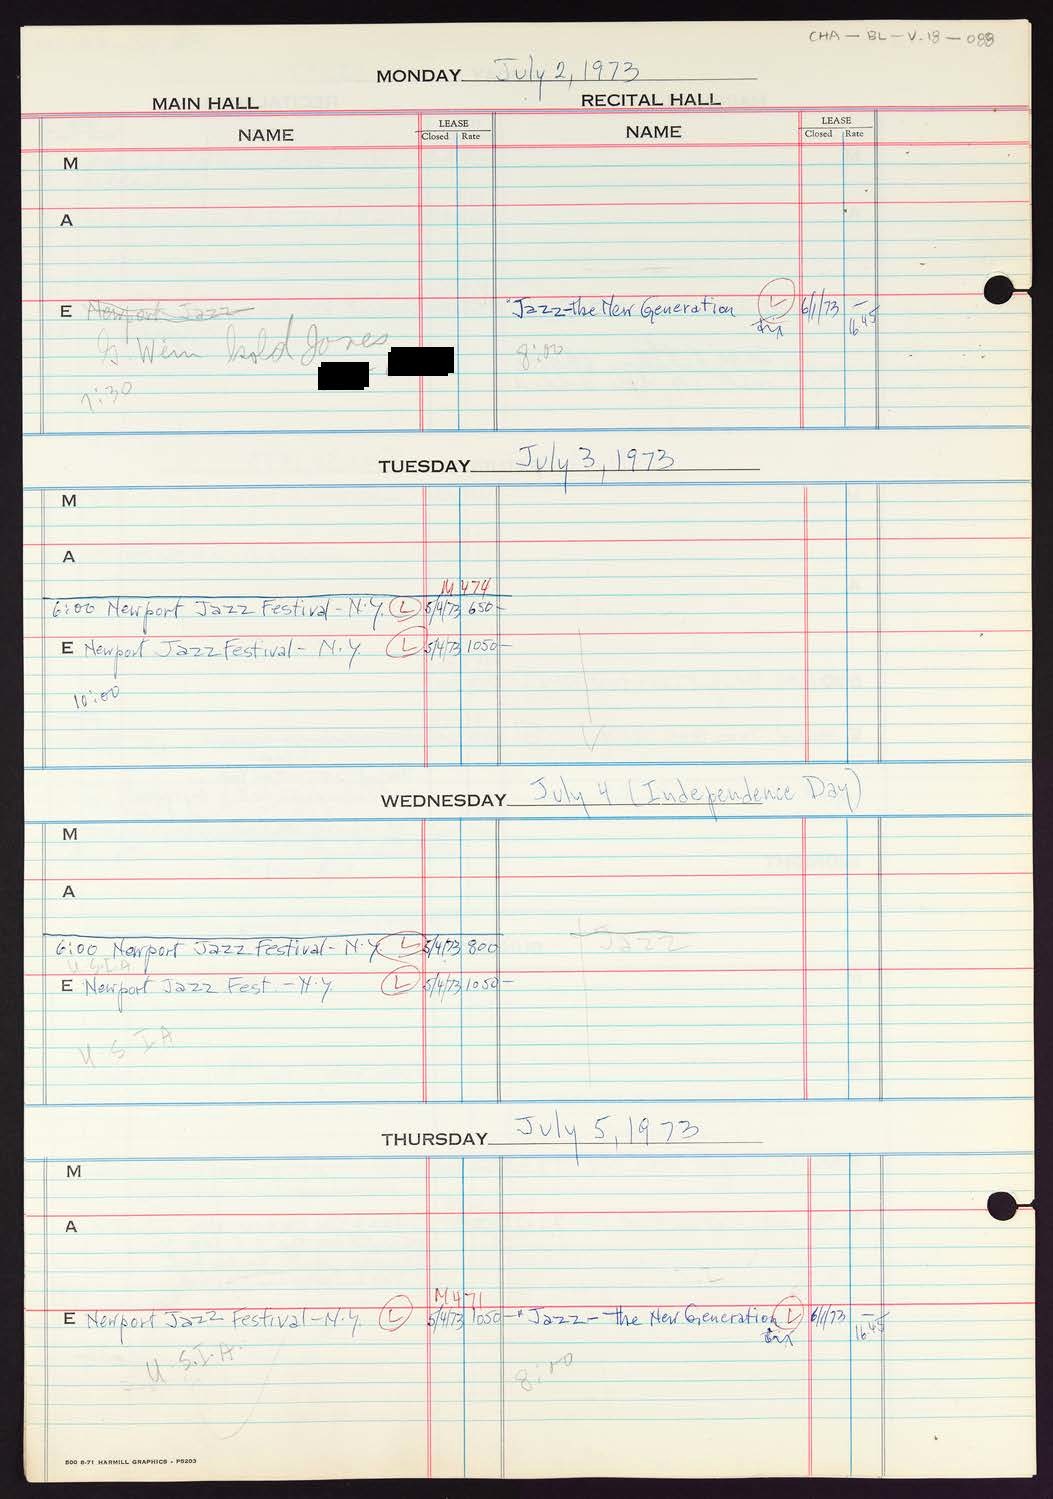 Carnegie Hall Booking Ledger, volume 18, page 88